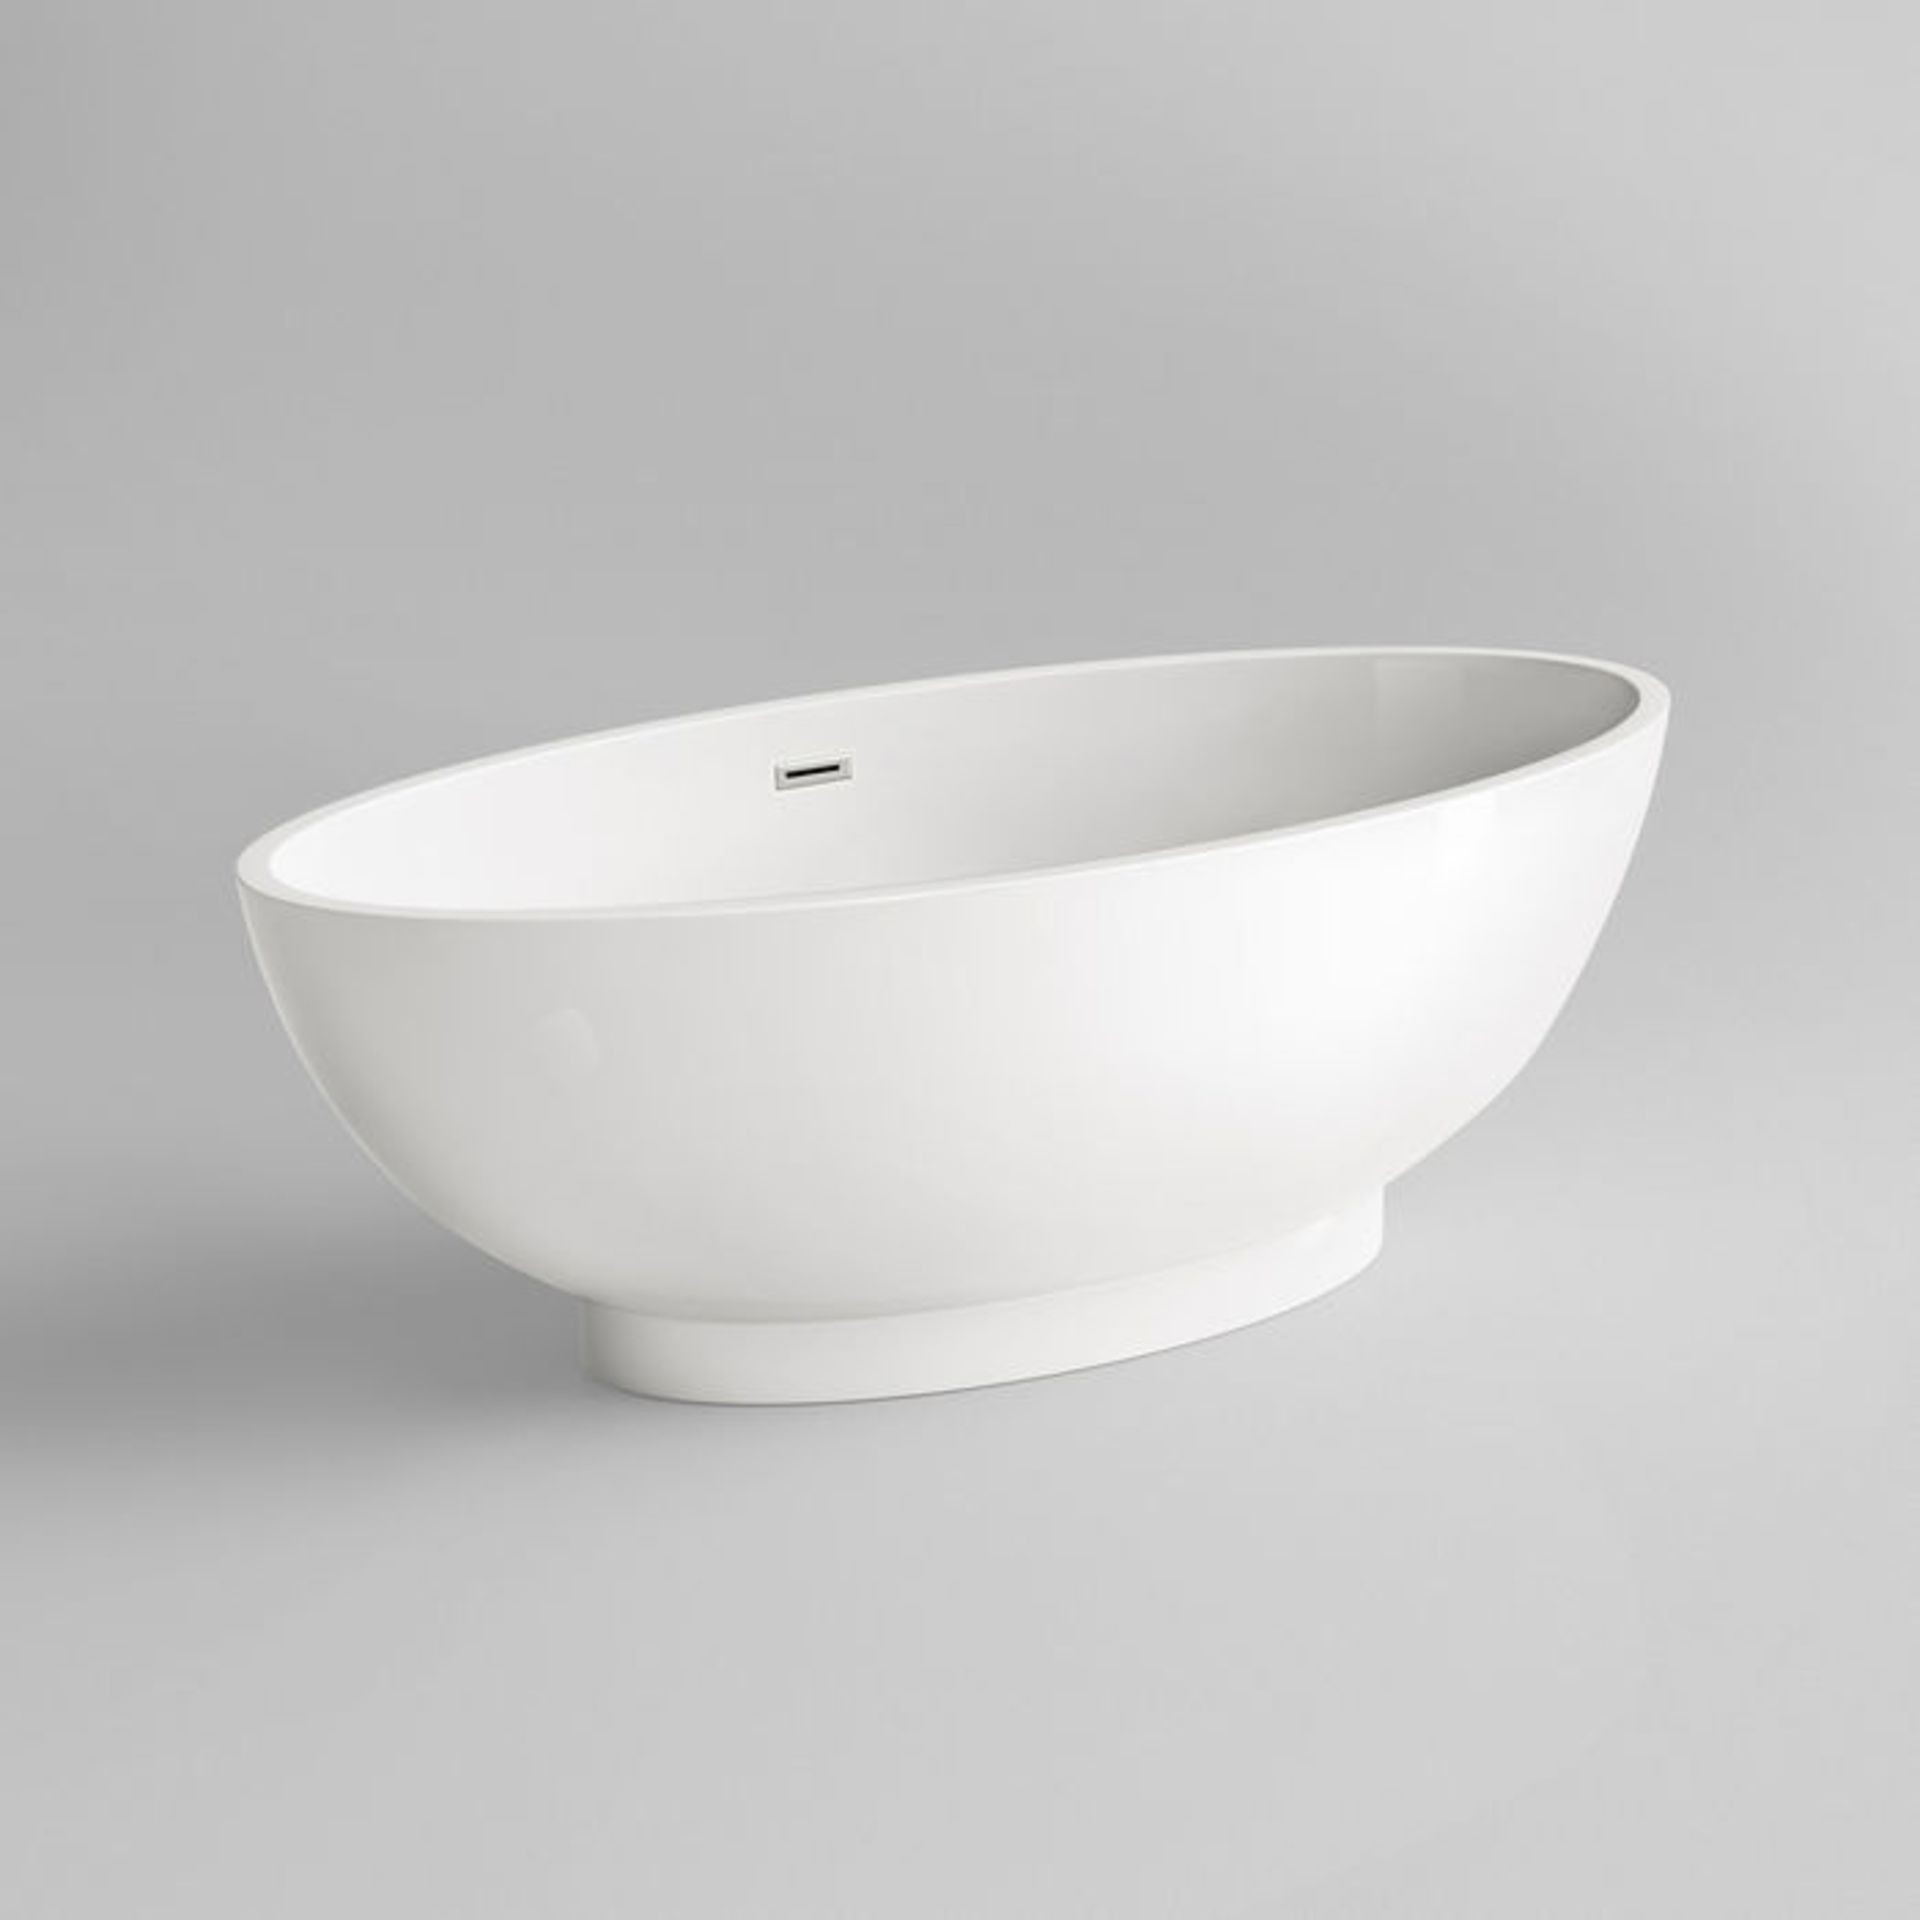 (S3) 1800mmx820mm Alexandra Freestanding Bath - Large RRP £1374.99 Visually simplistic to suit any - Image 3 of 3